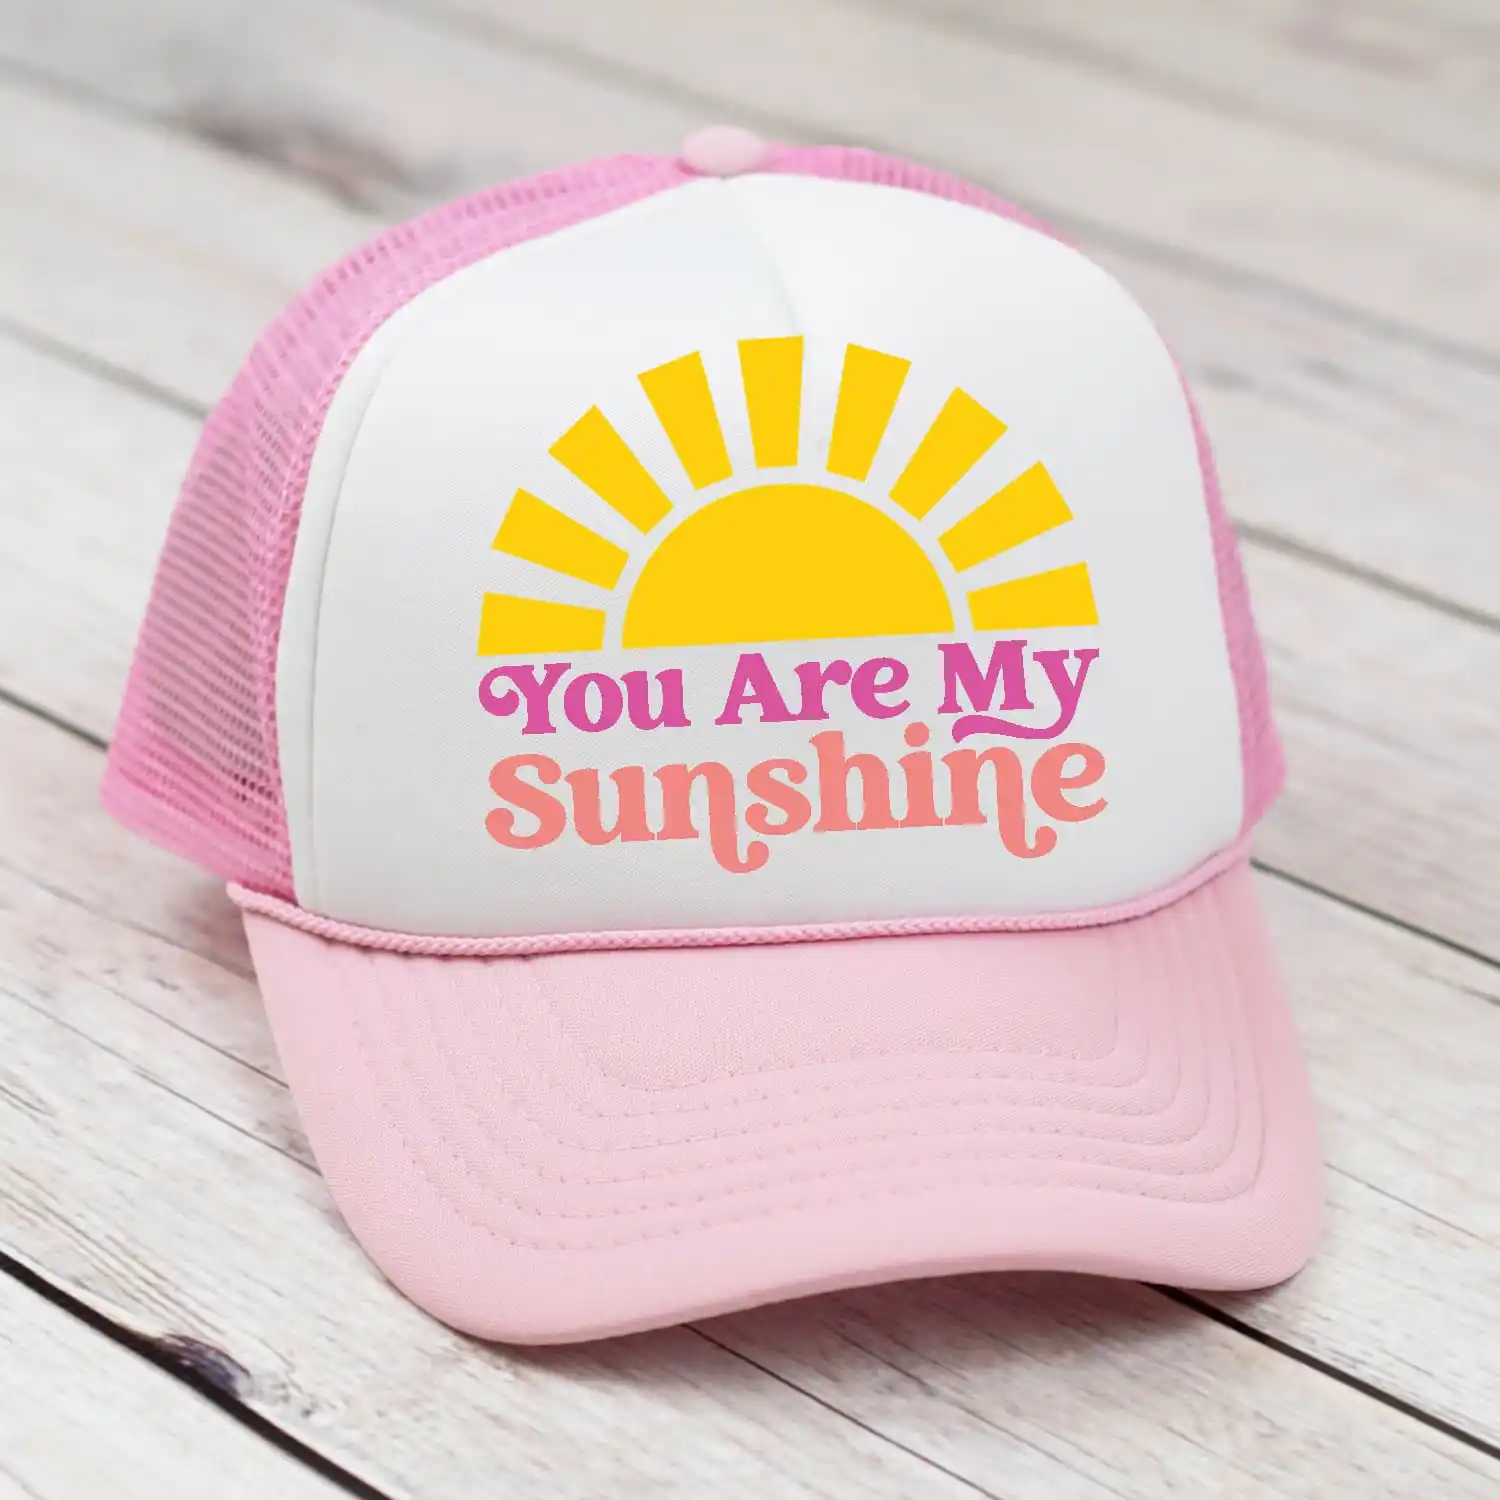 A pink and white baseball cap sits on a light grey wooden table. The words on the hat read, "You are my Sunshine" below a bright yellow illustrated sun.